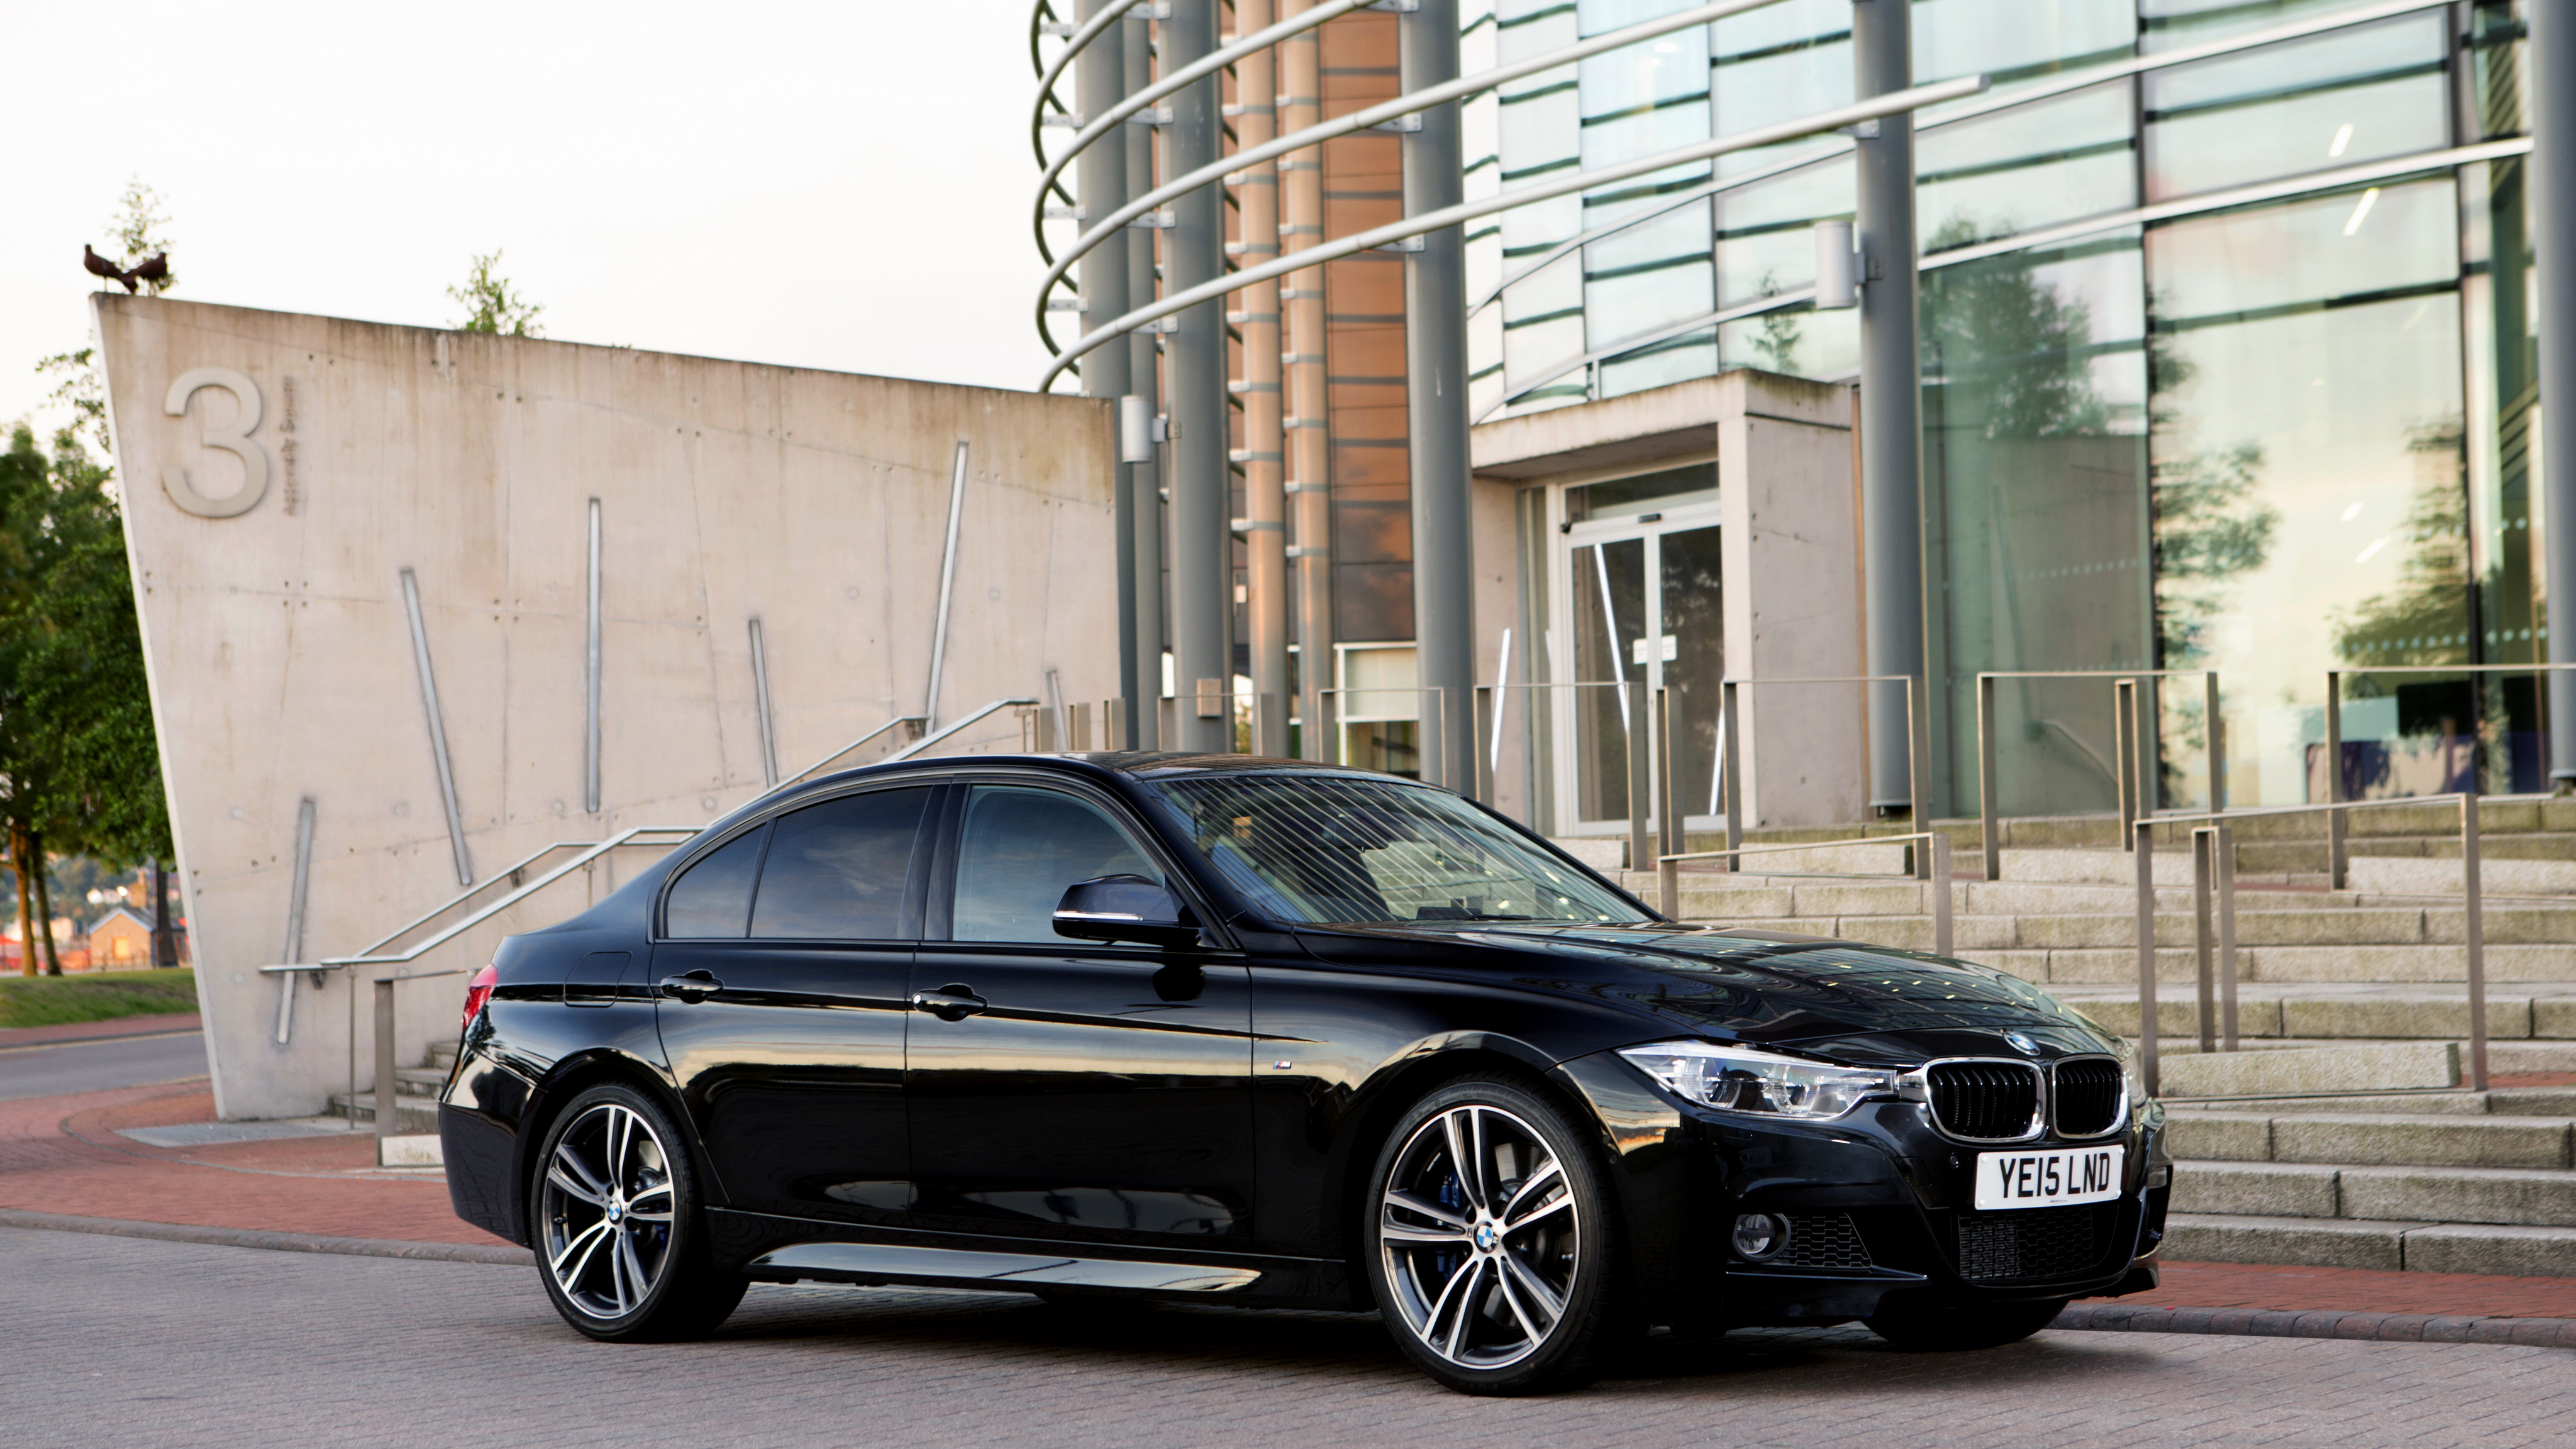 Vehicles BMW 3 Series HD Wallpaper | Background Image